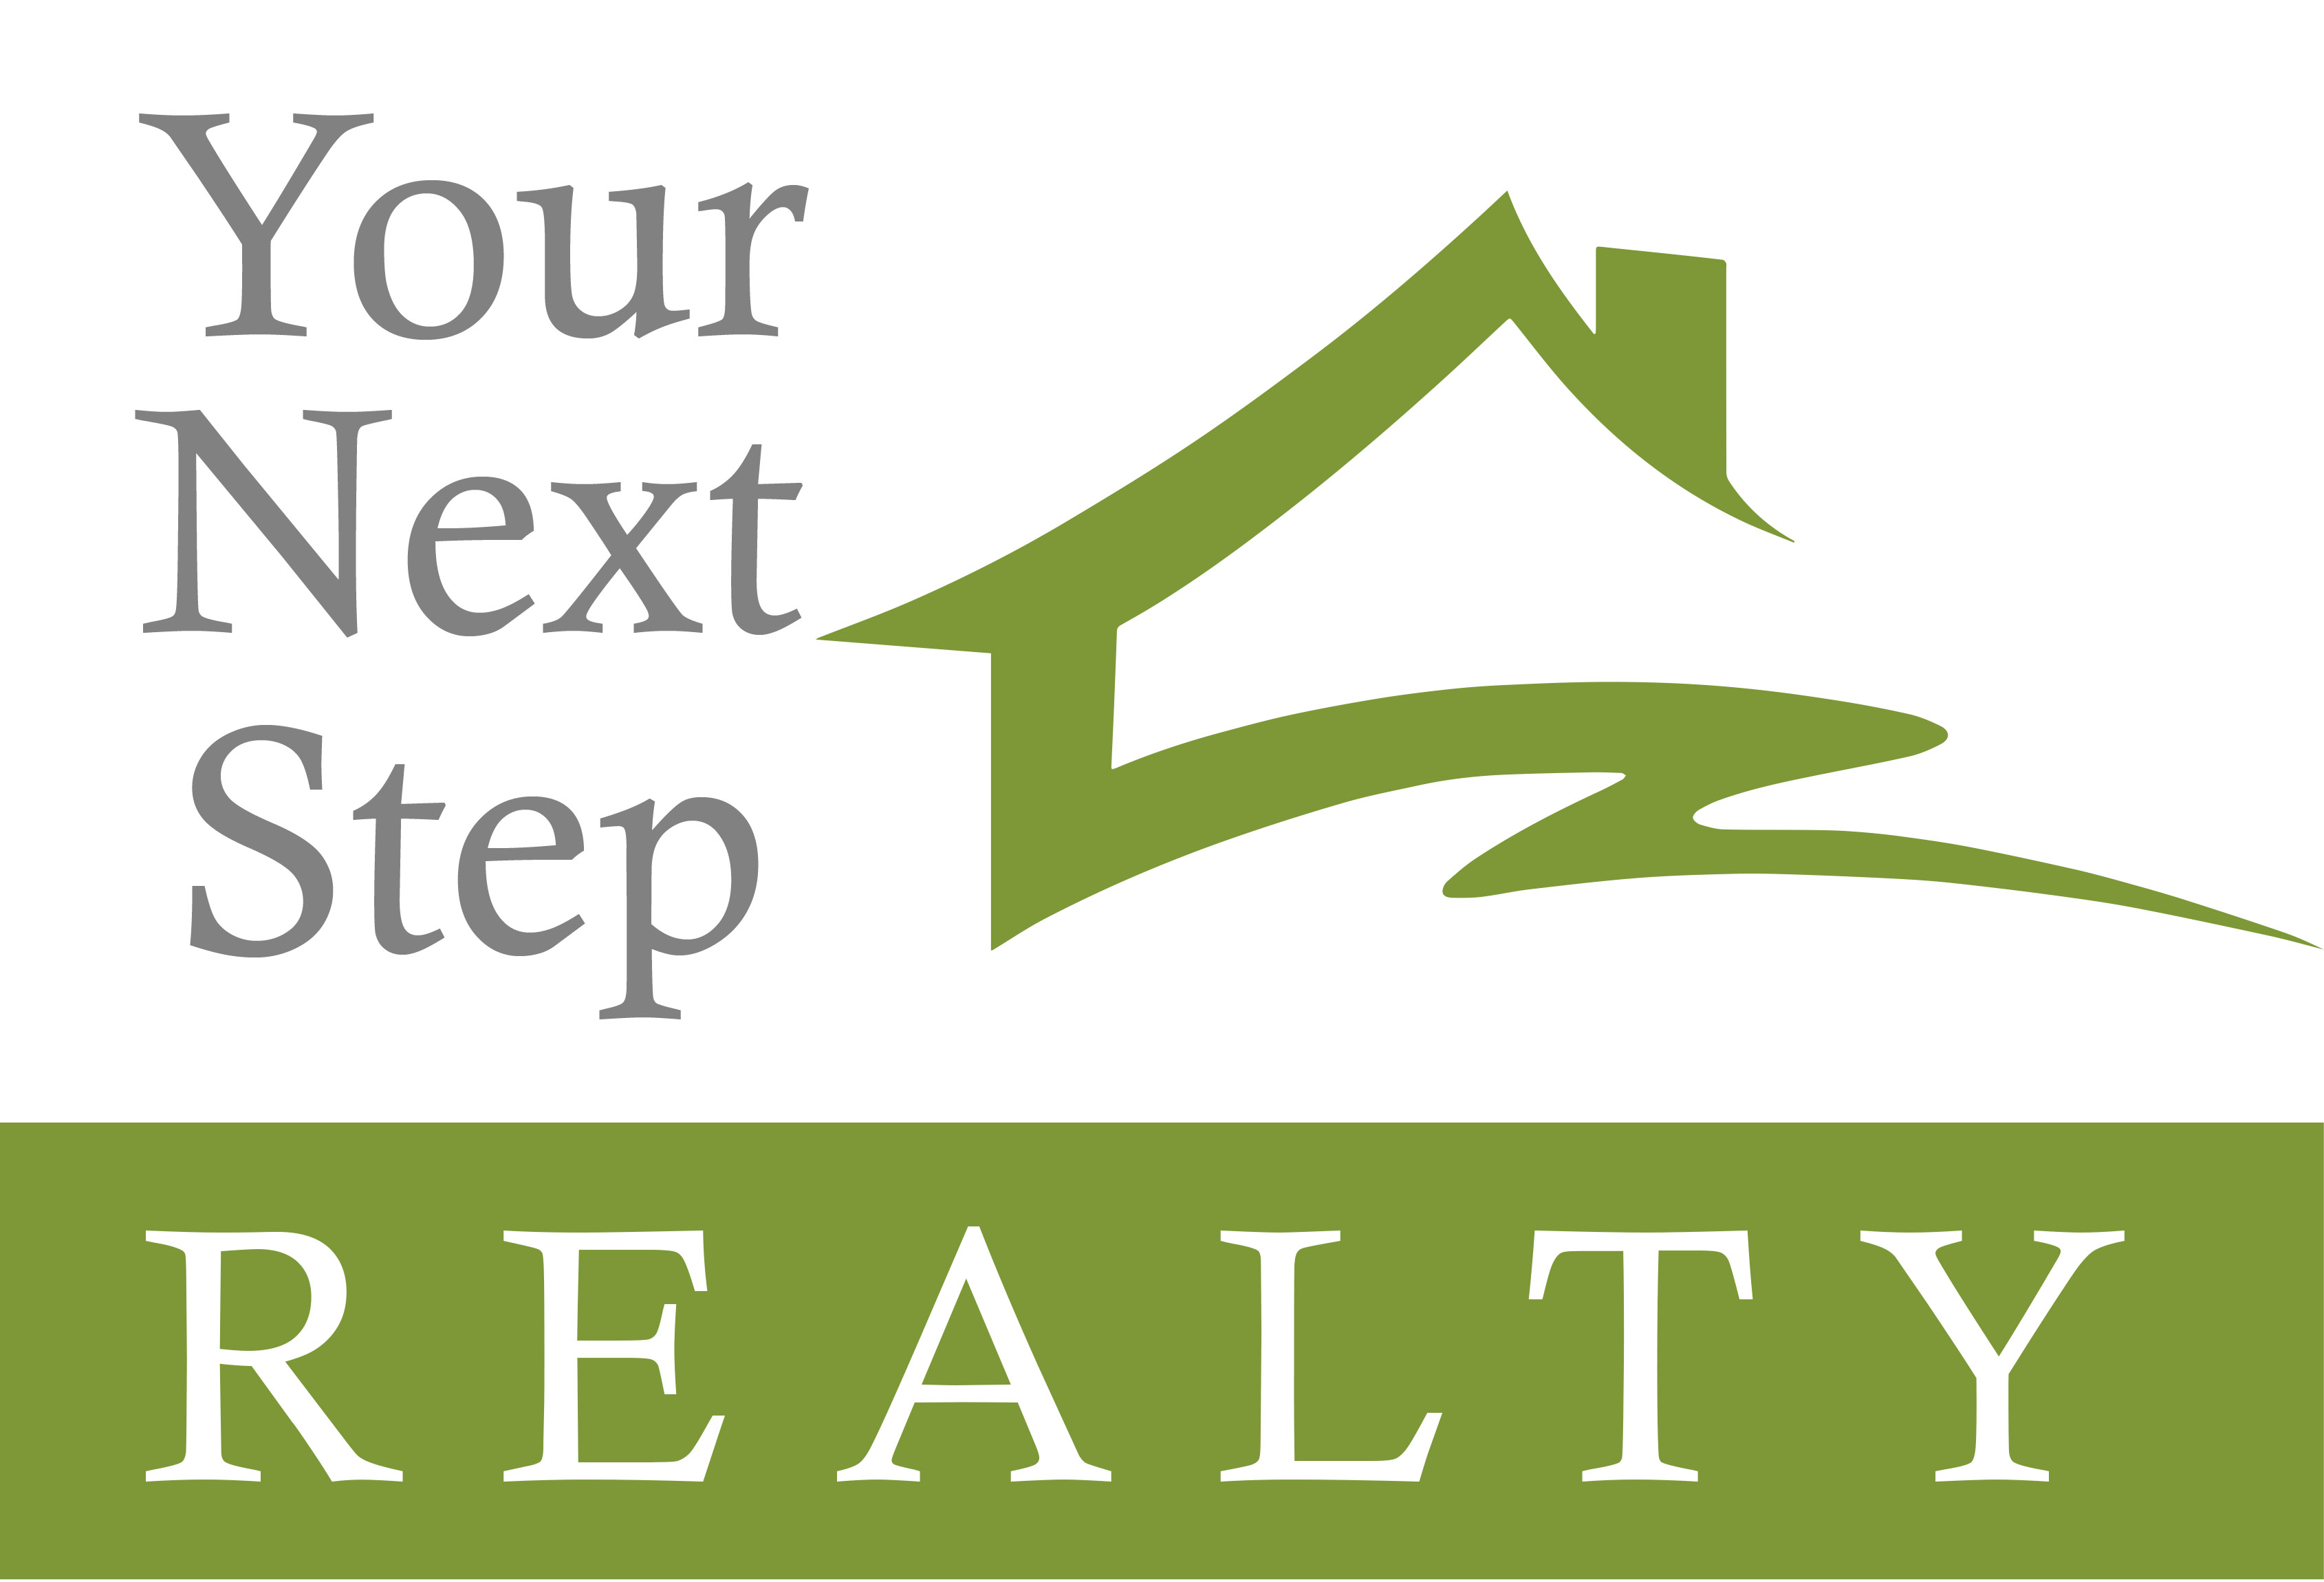 Your Next Step Realty